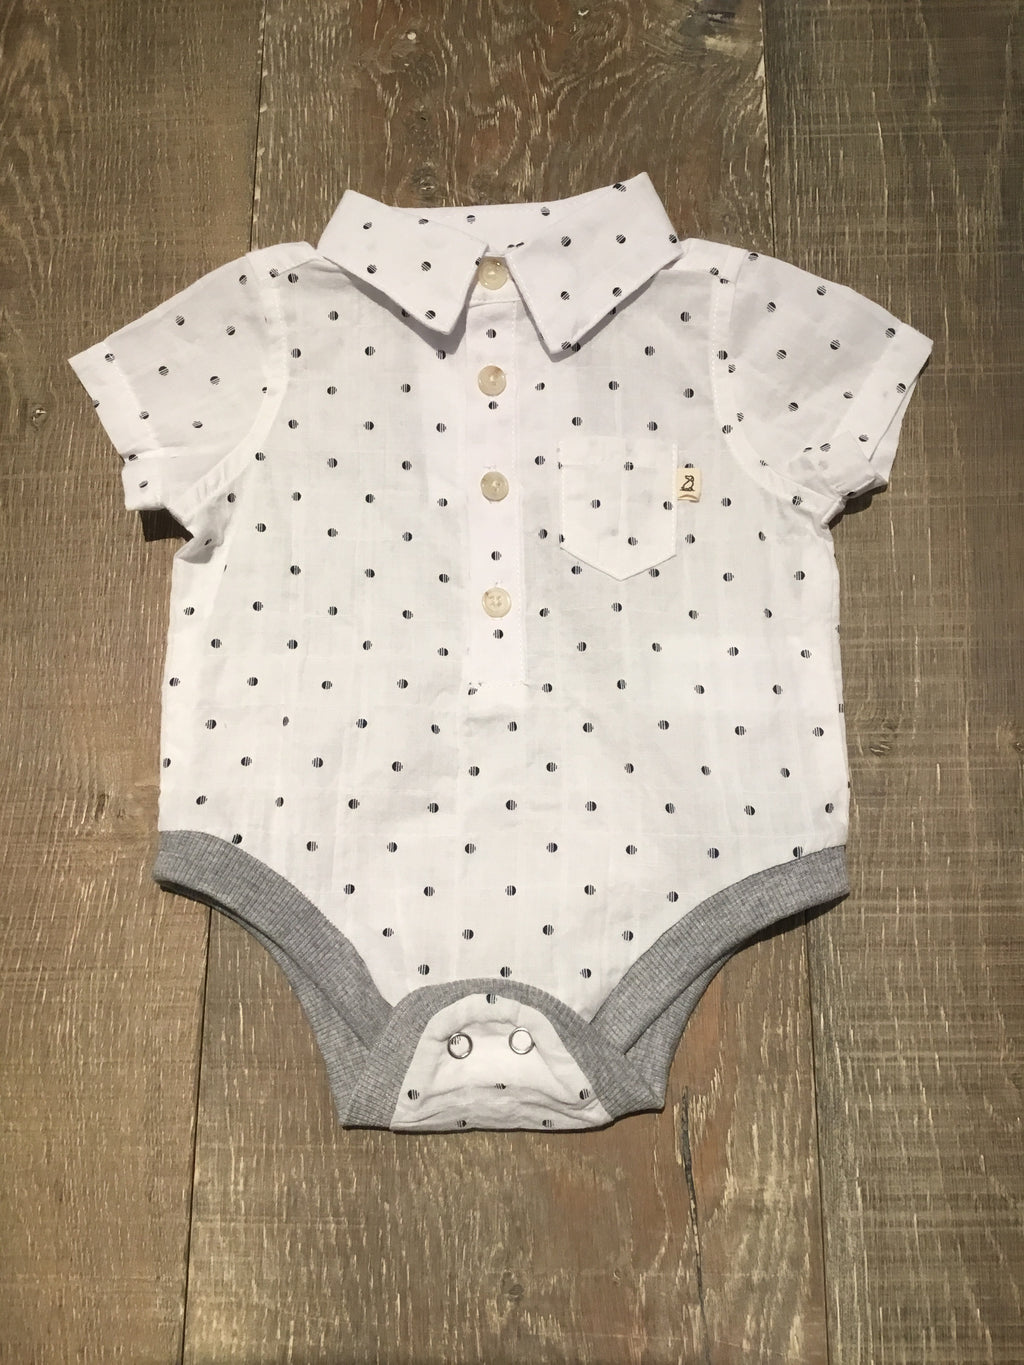 Me & Henry – Bright Beginnings Boutique